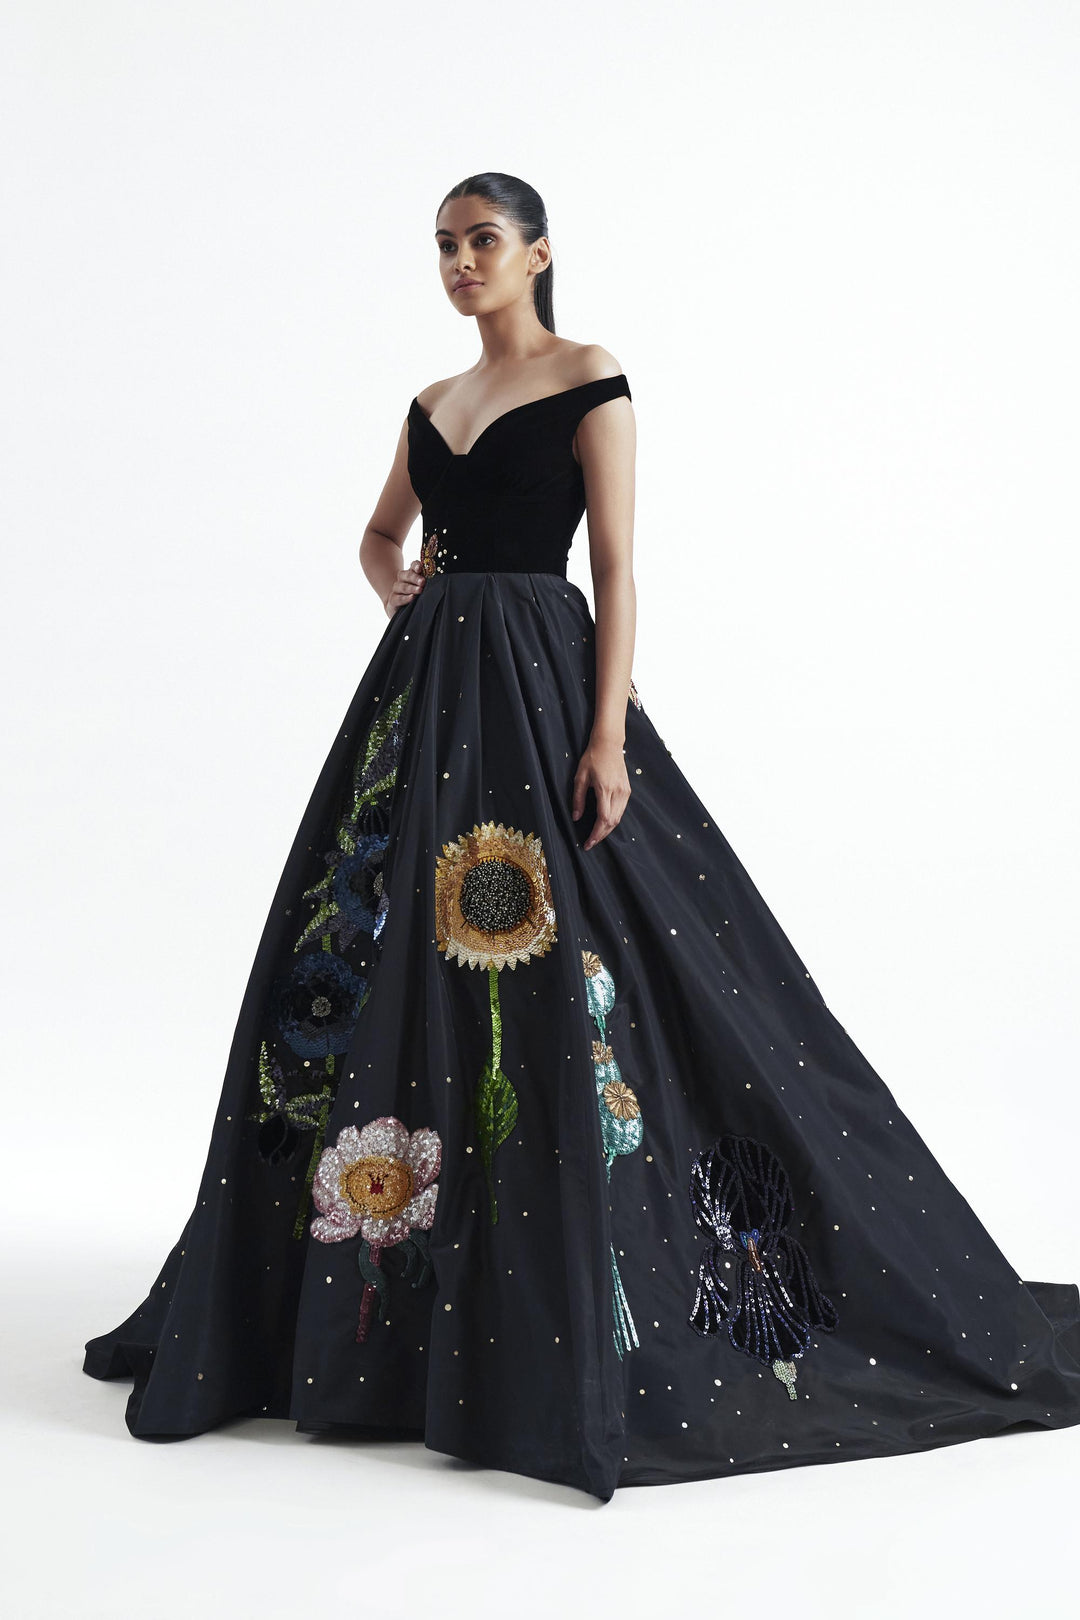 Wide neck off shoulder velvet upper body with botanical embroidery on lower body